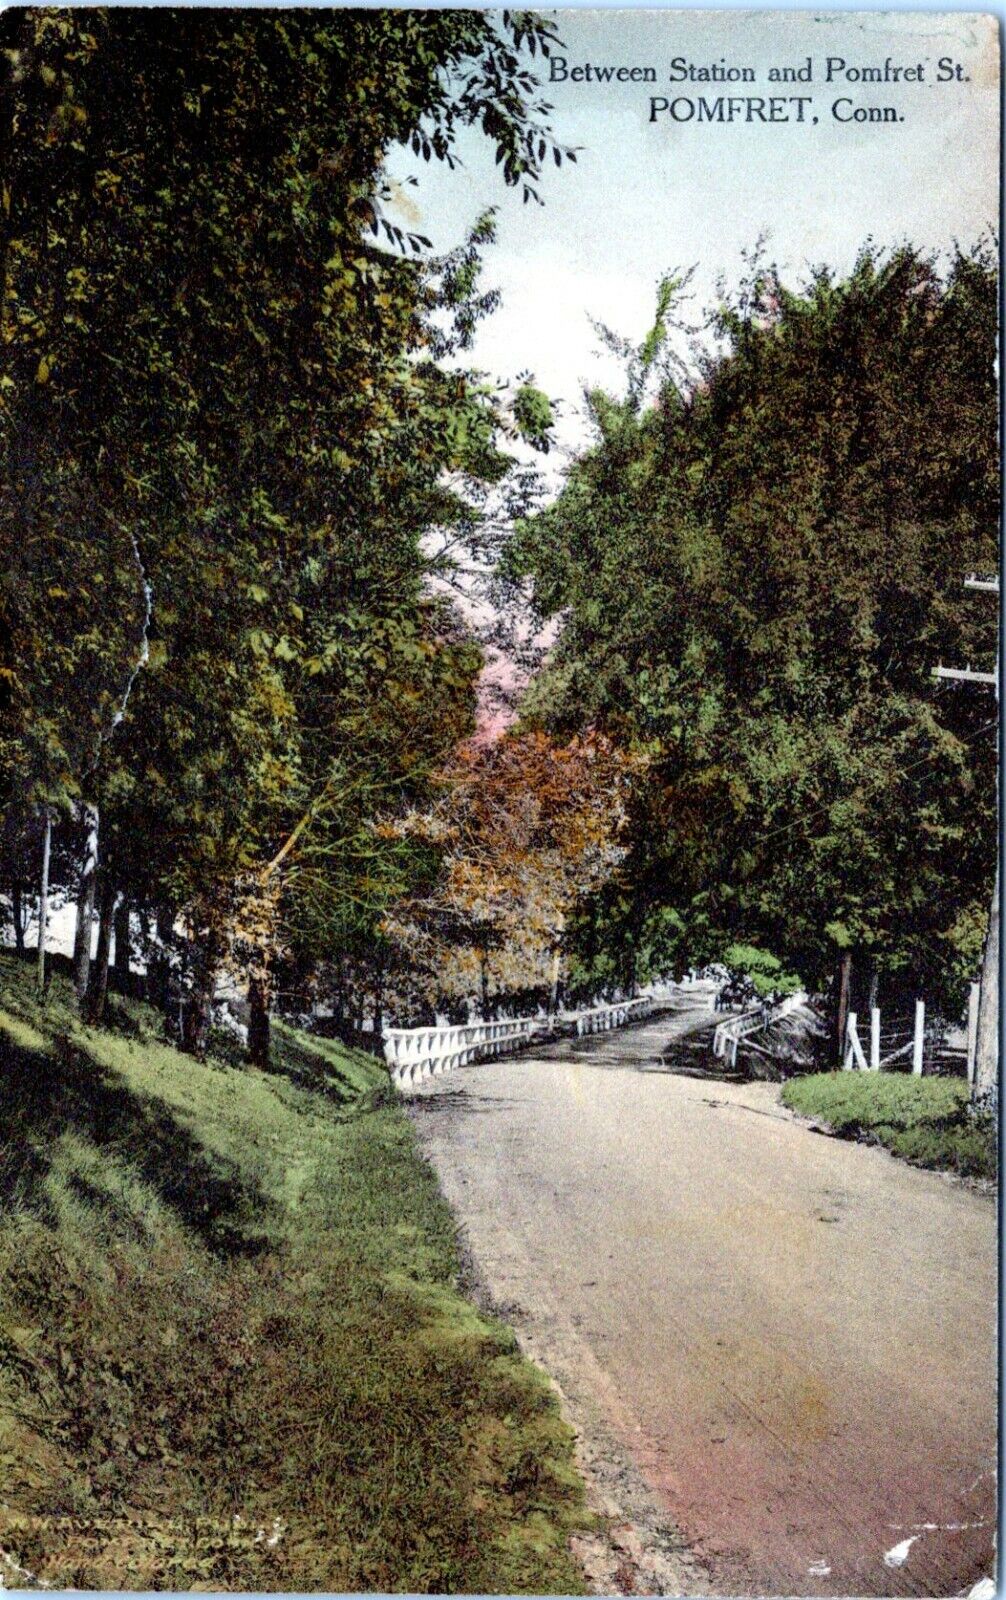 Pomfret Connecticut Postcard 1918 Between Station and Pomfret Street View NH